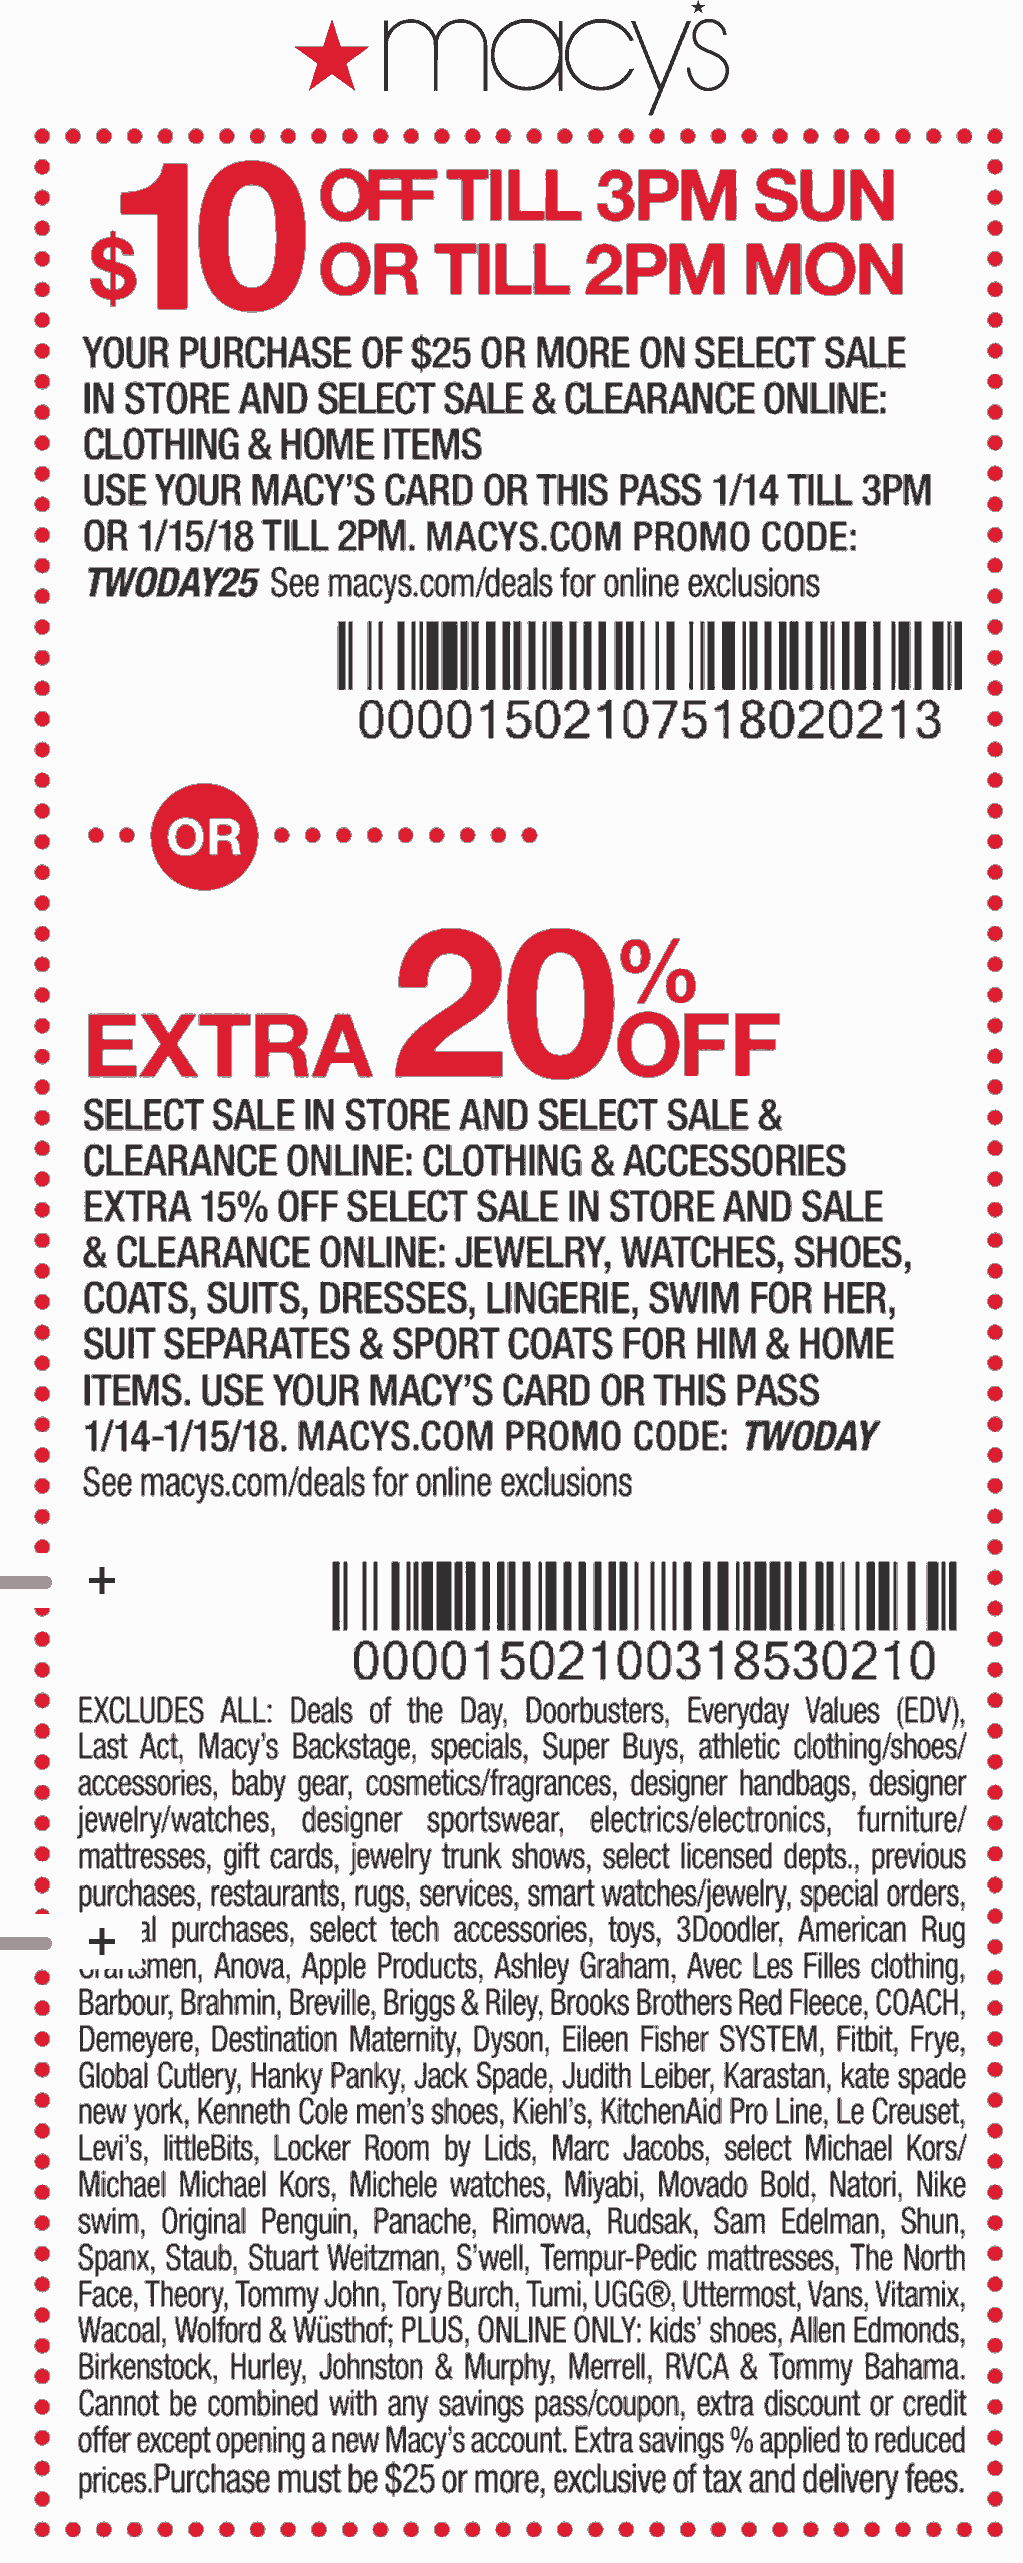 Macys October 2020 Coupons and Promo Codes